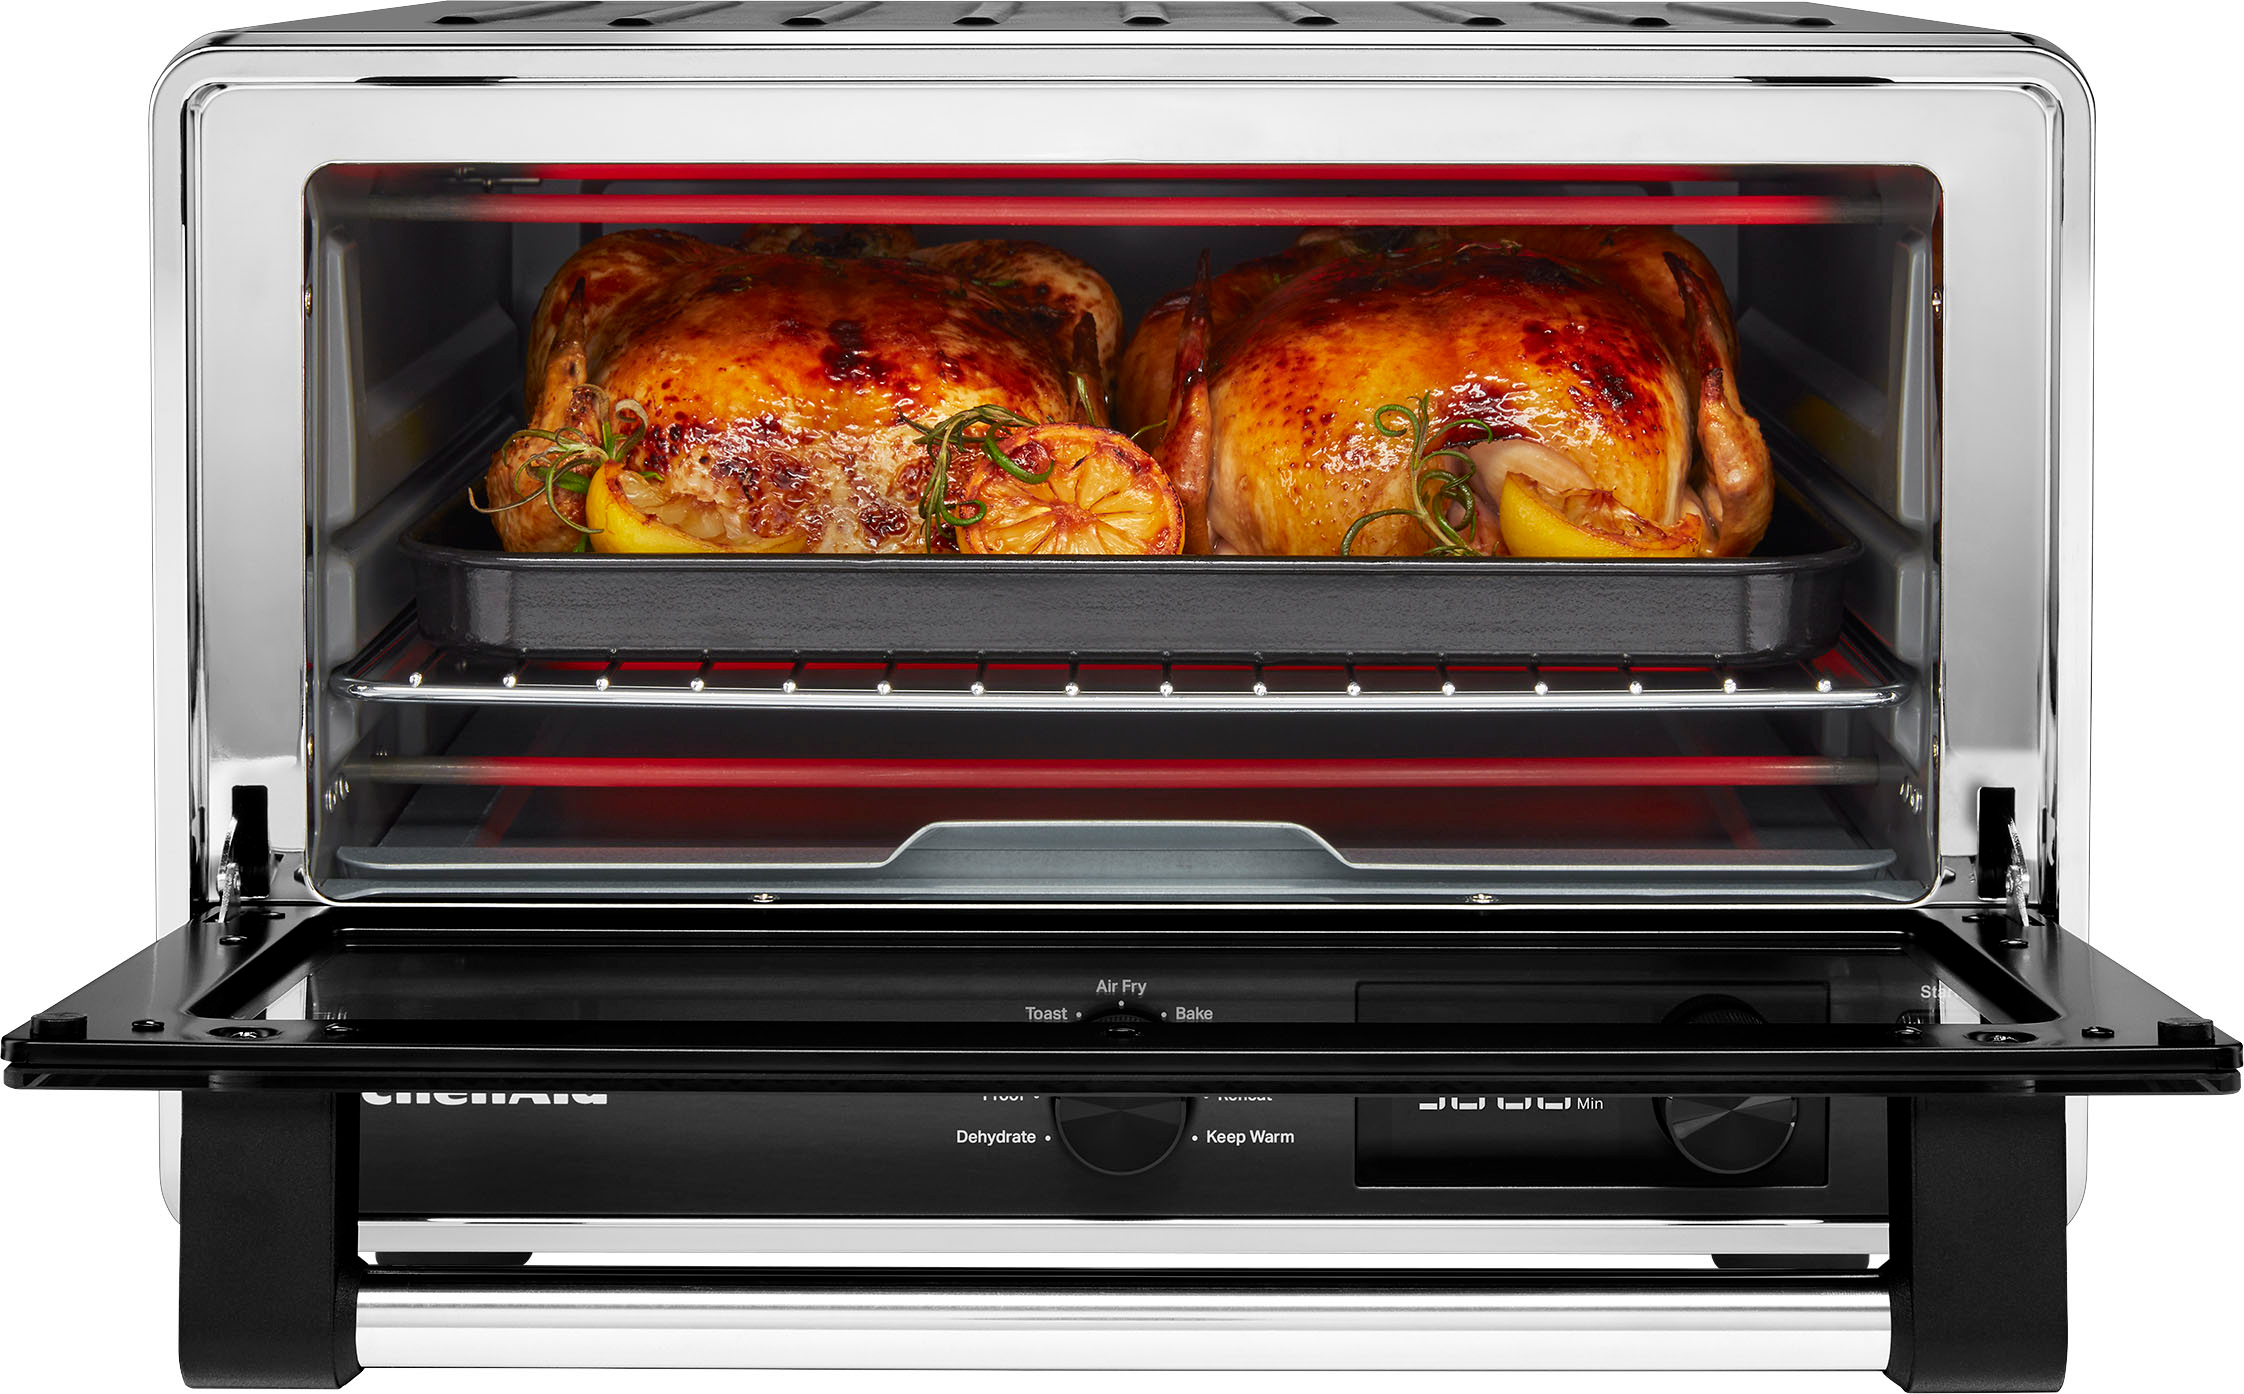  KitchenAid Digital Countertop Oven with Air Fry